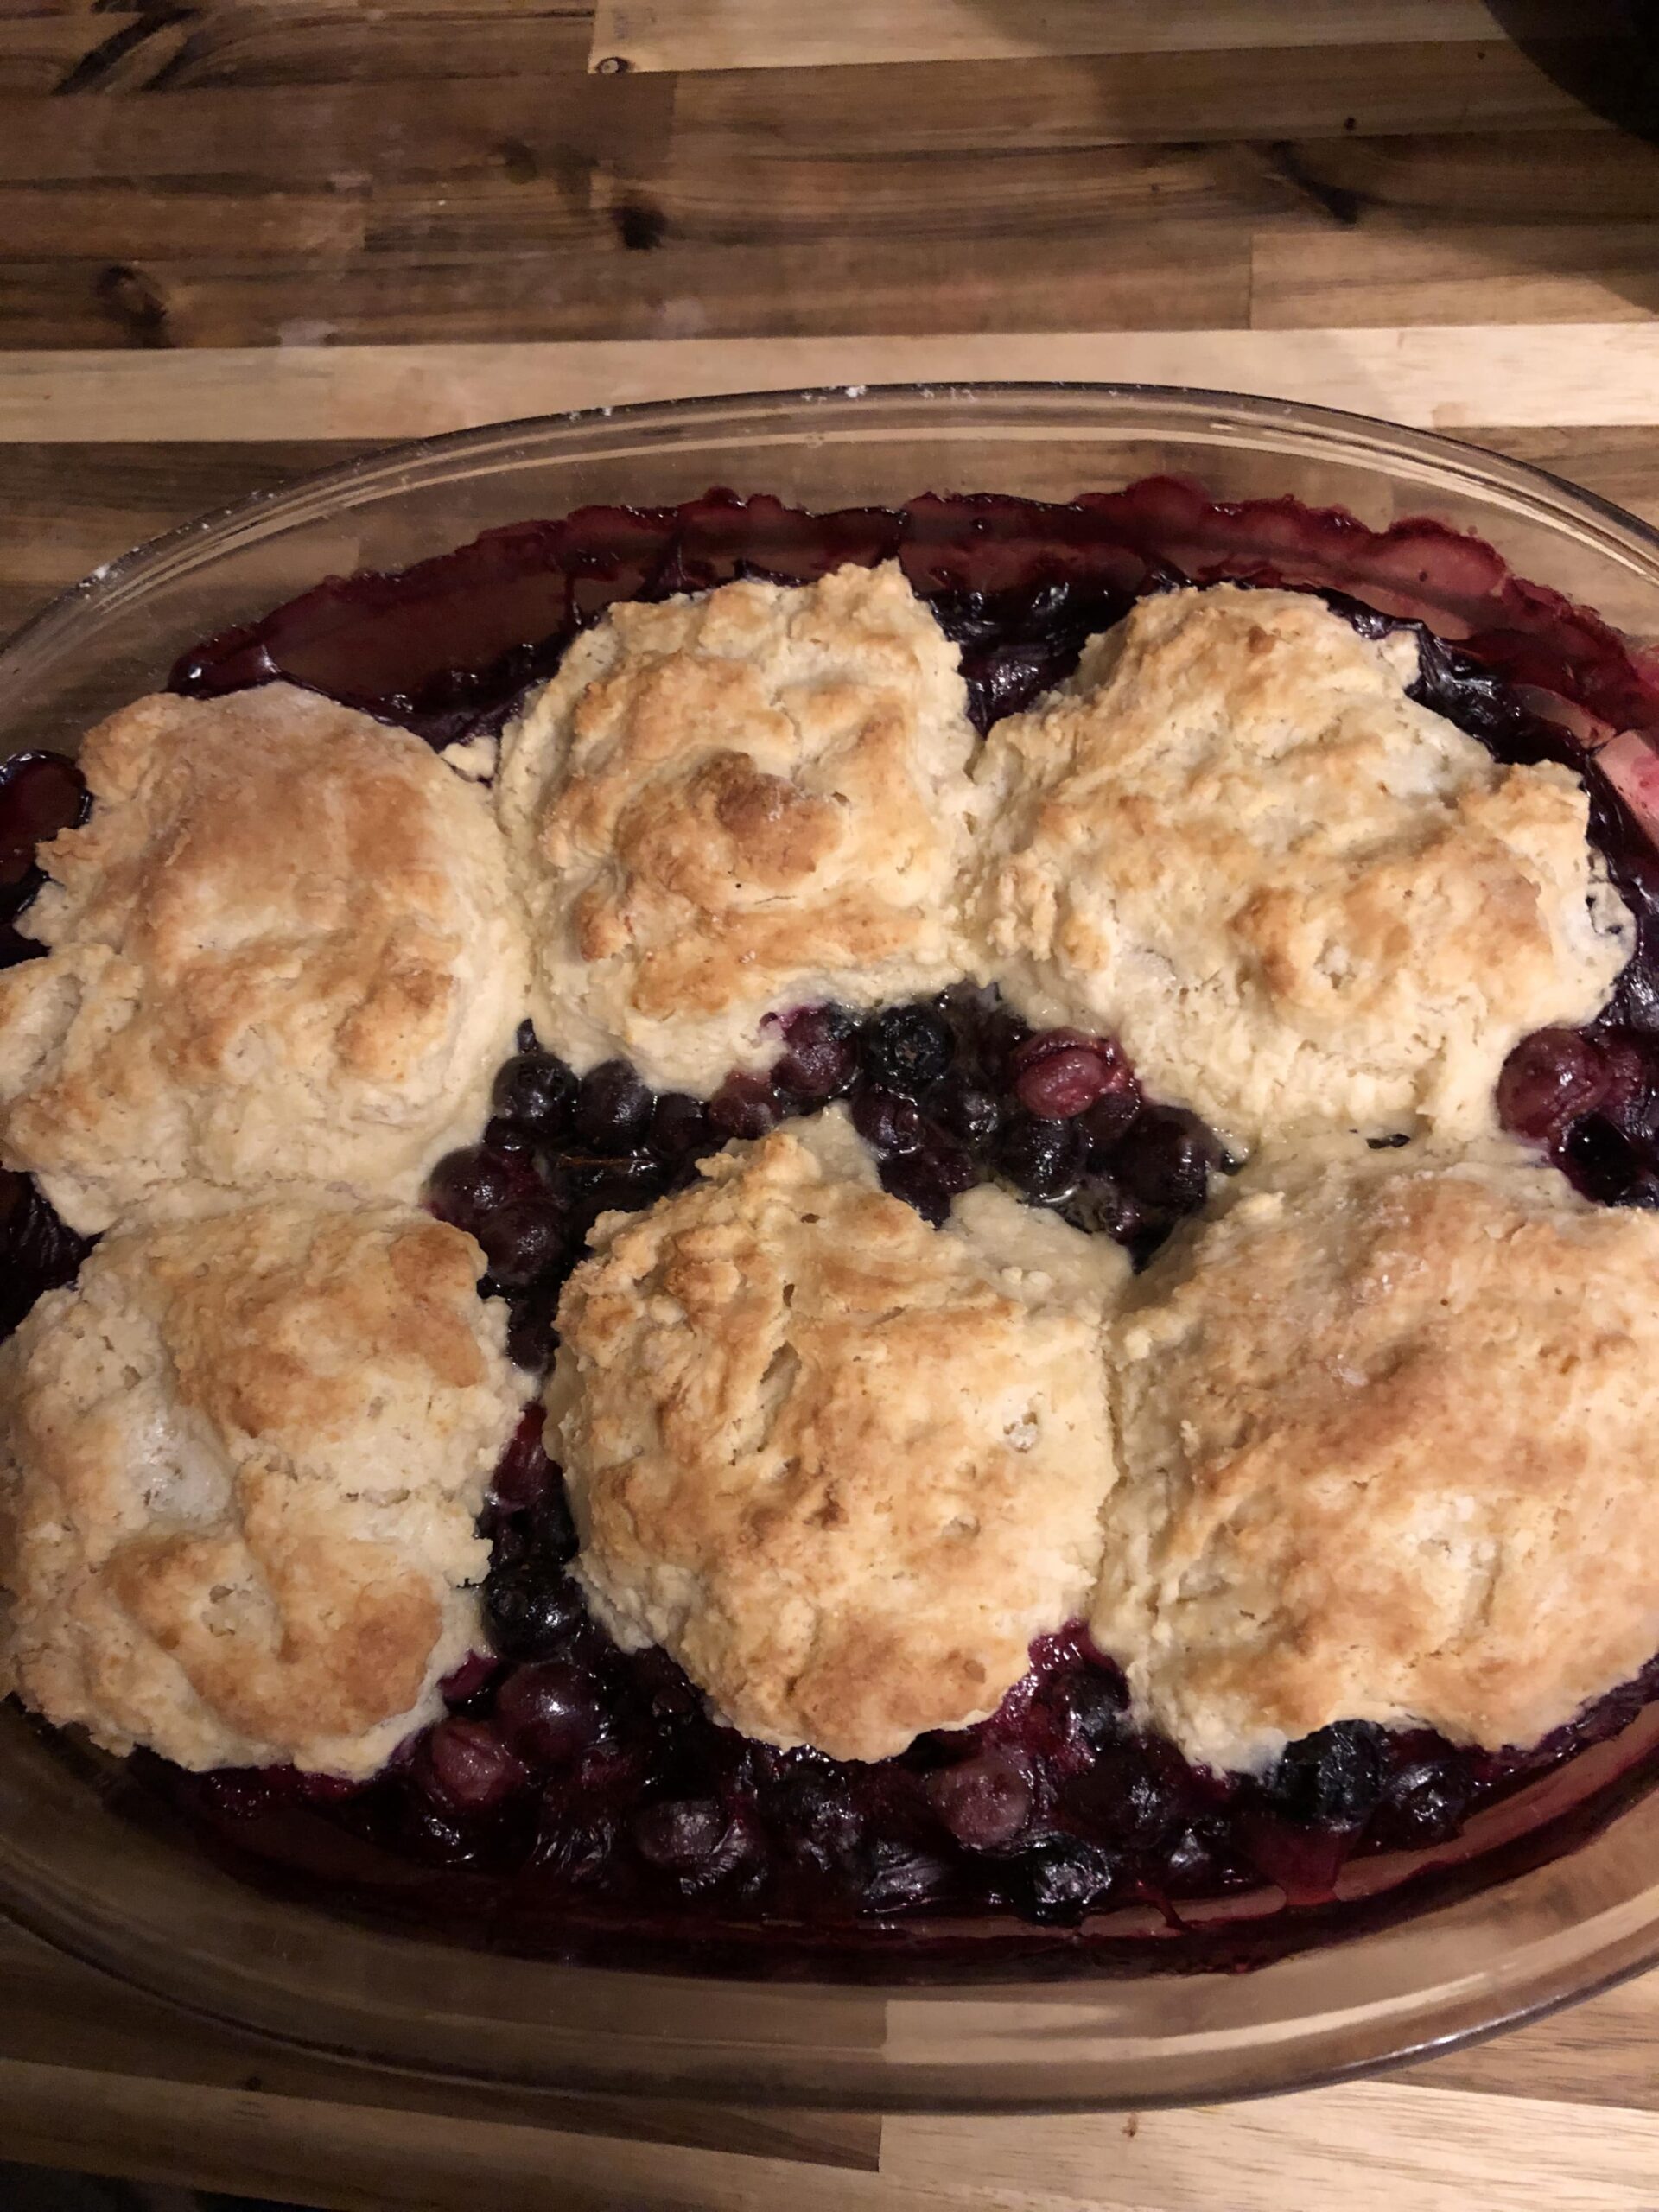 blueberry cobbler ready to eat